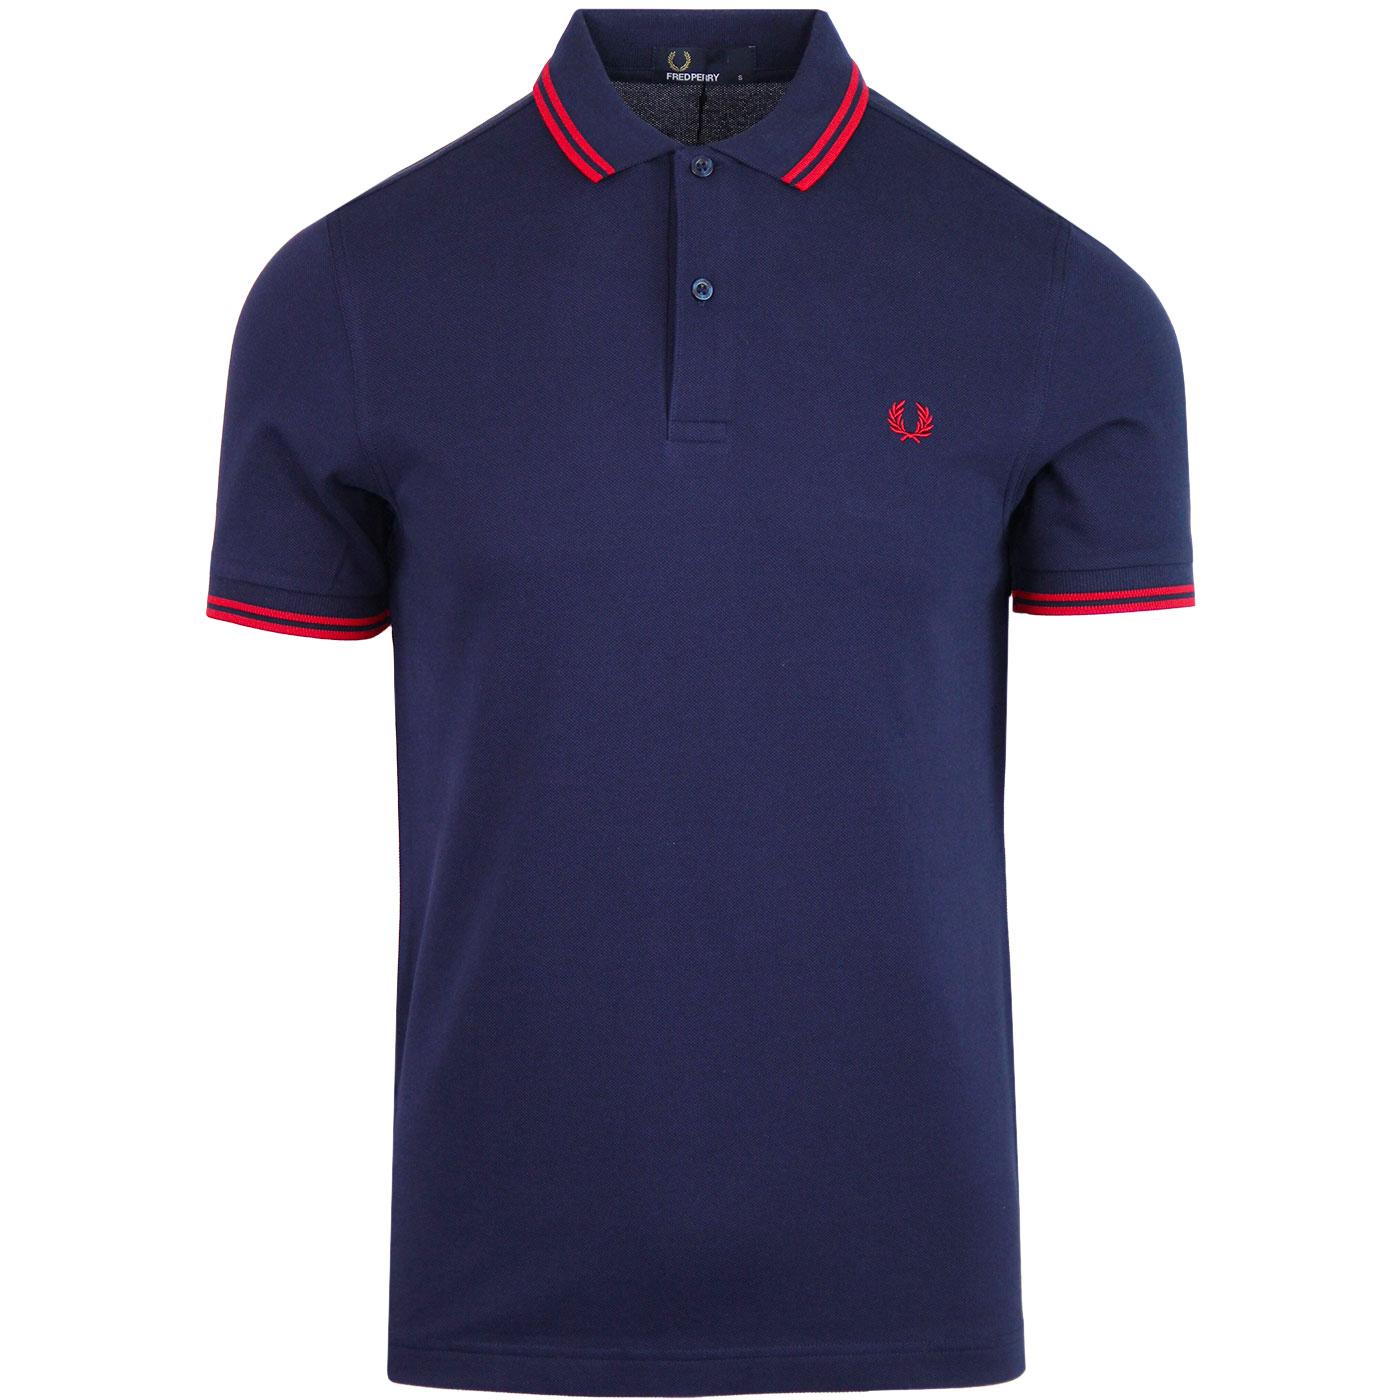 FRED PERRY M3600 Mod Twin Tipped Polo Shirt CARBON